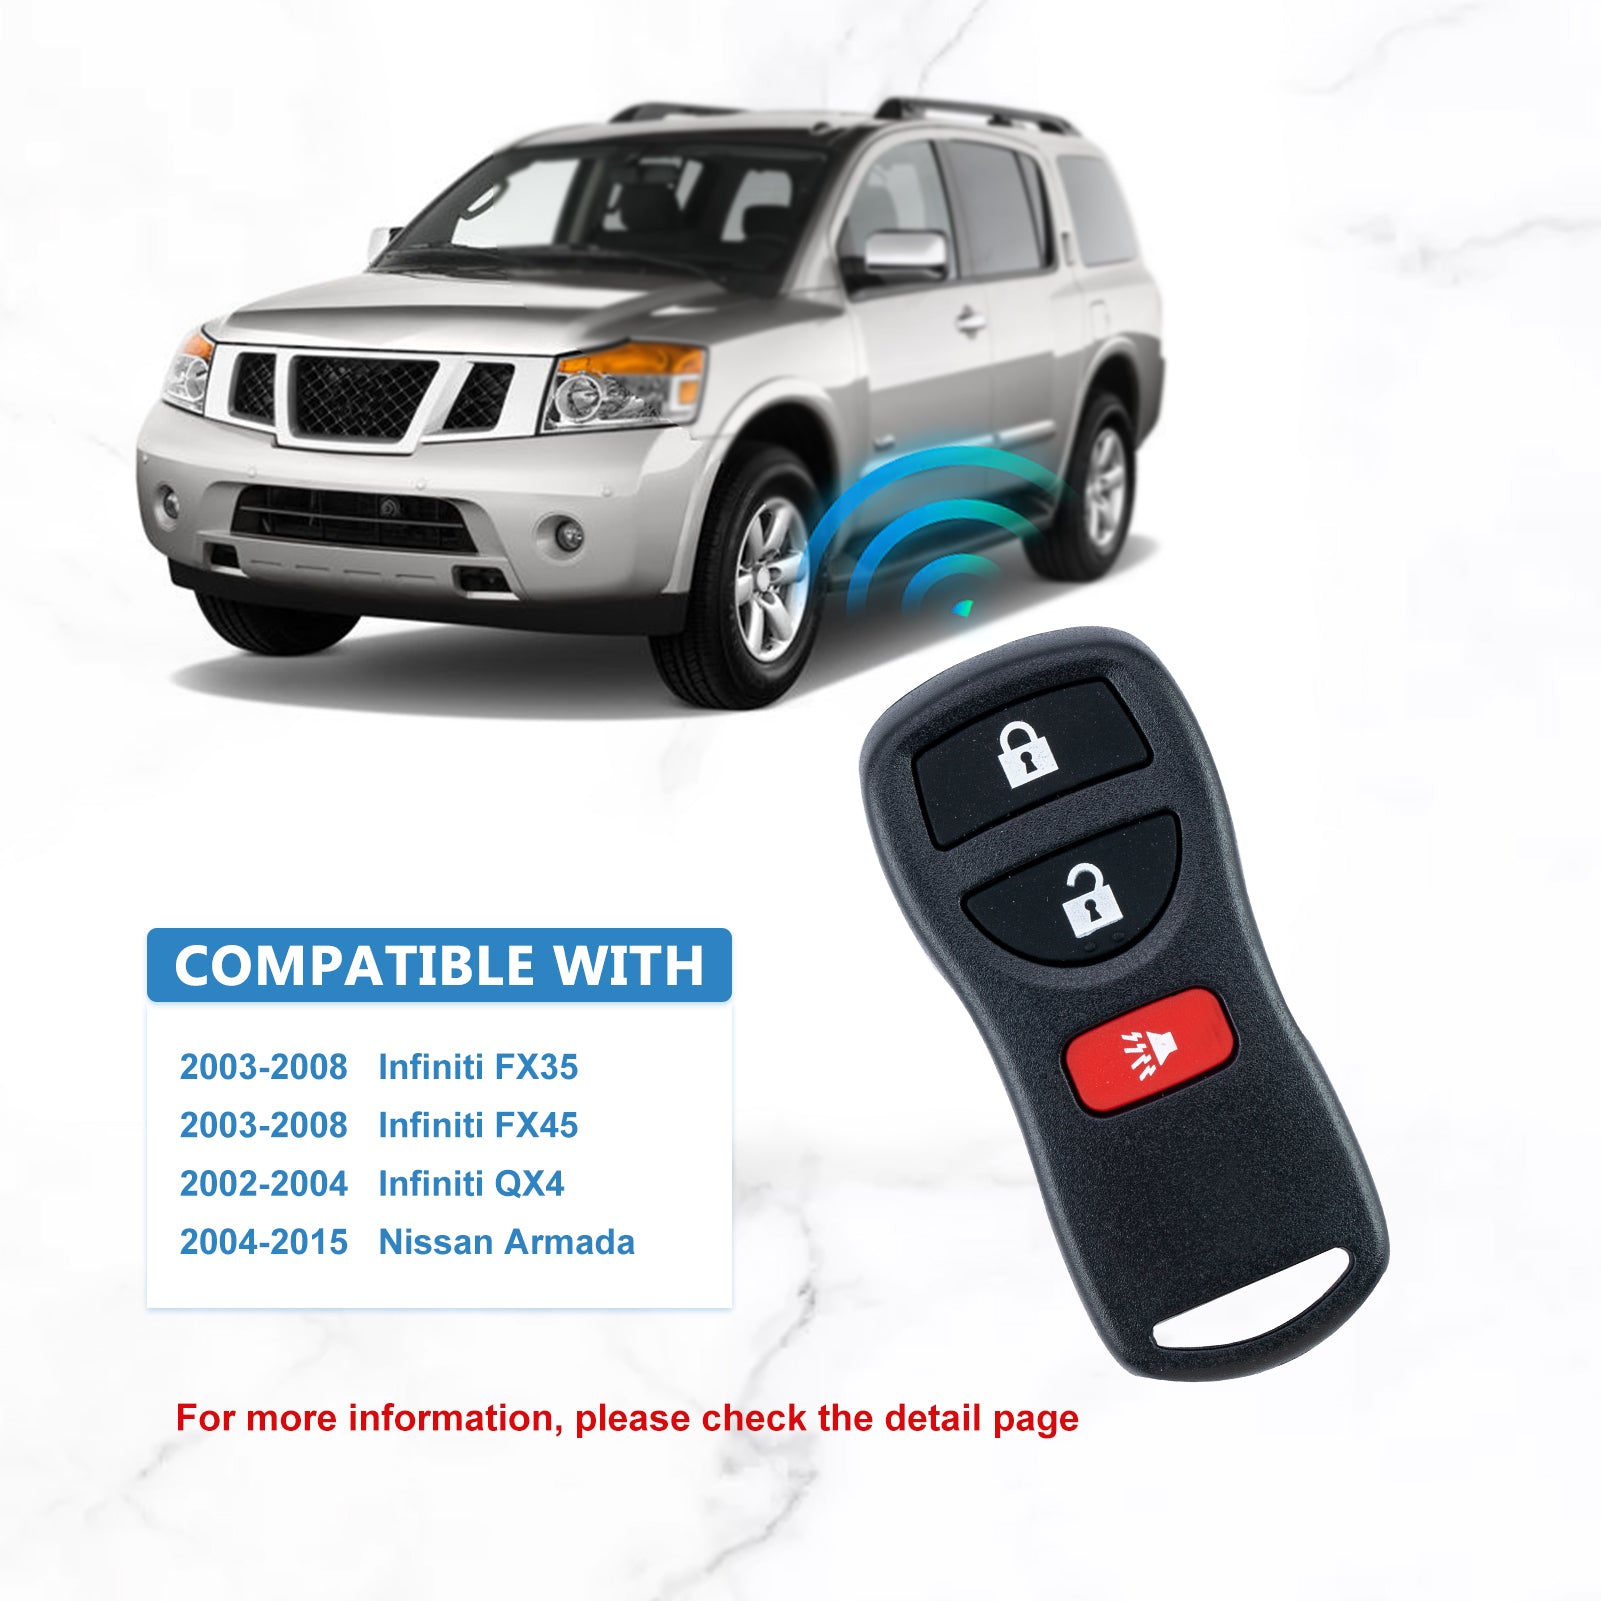 Replacement for Select Armada Murano Pathfinder Quest Titan keyless Entry Remote 3 Button KBRASTU15